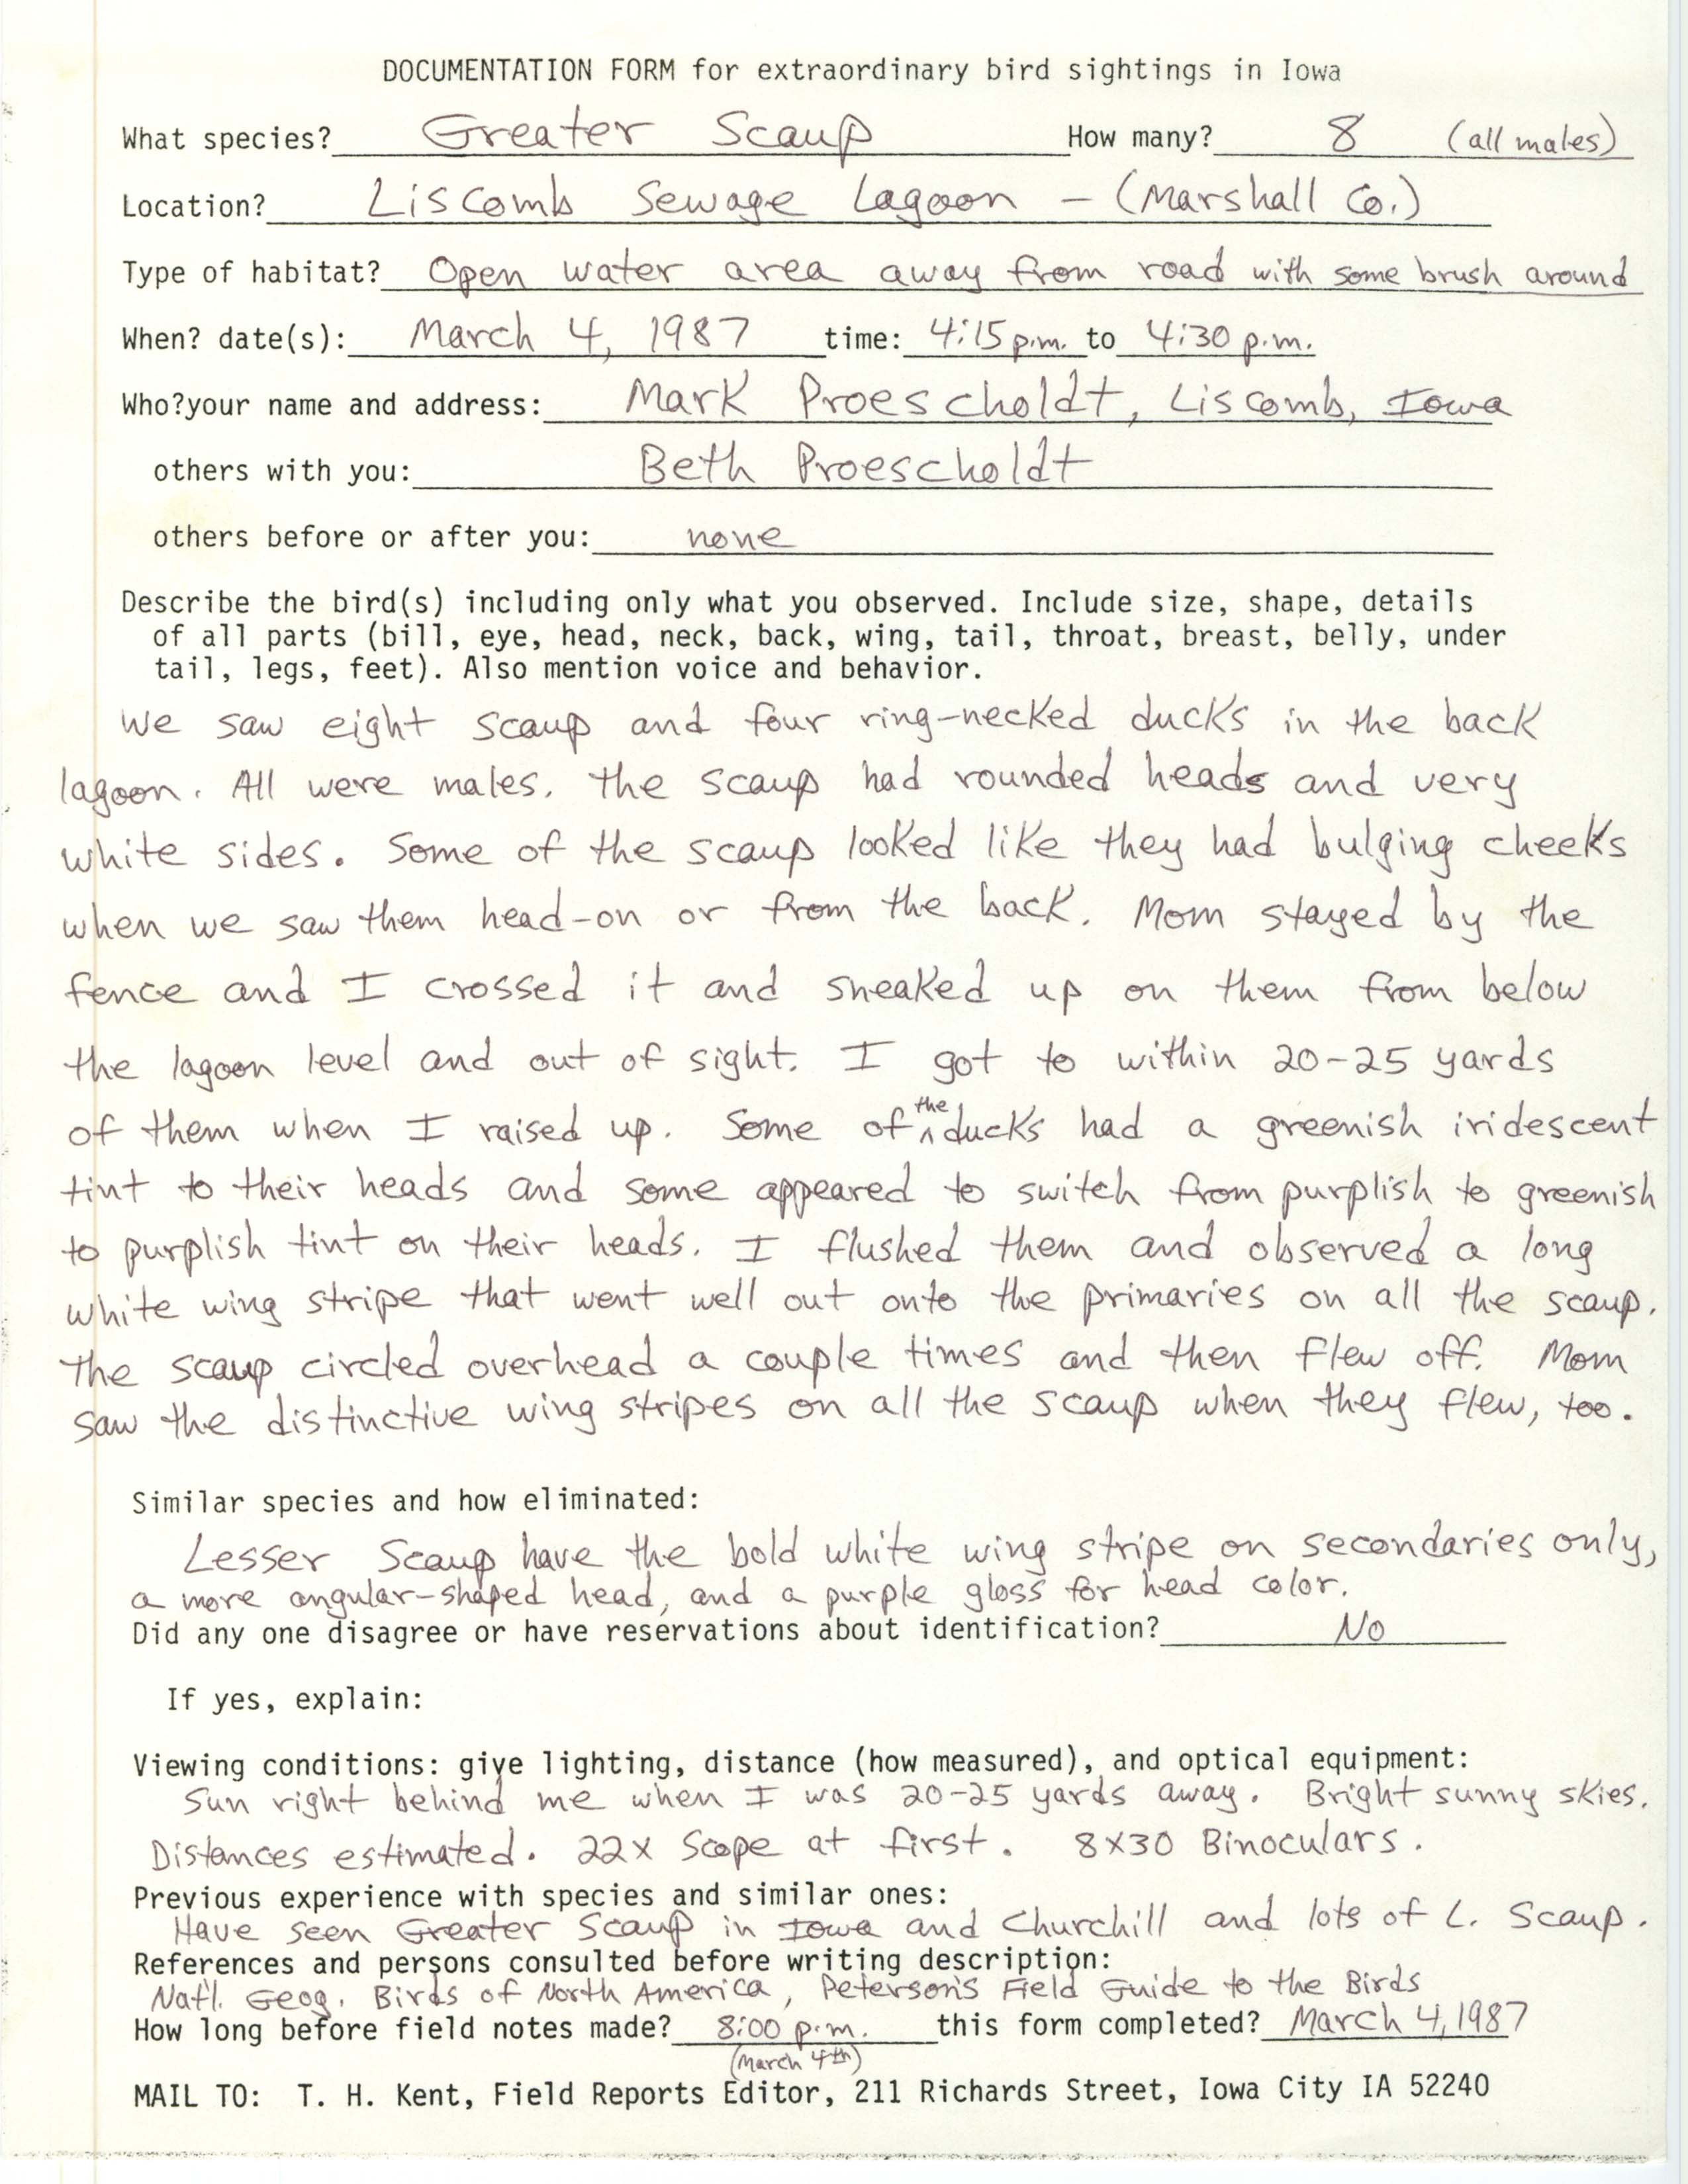 Rare bird documentation form for Greater Scaup at Liscomb Sewage Lagoon, 1987